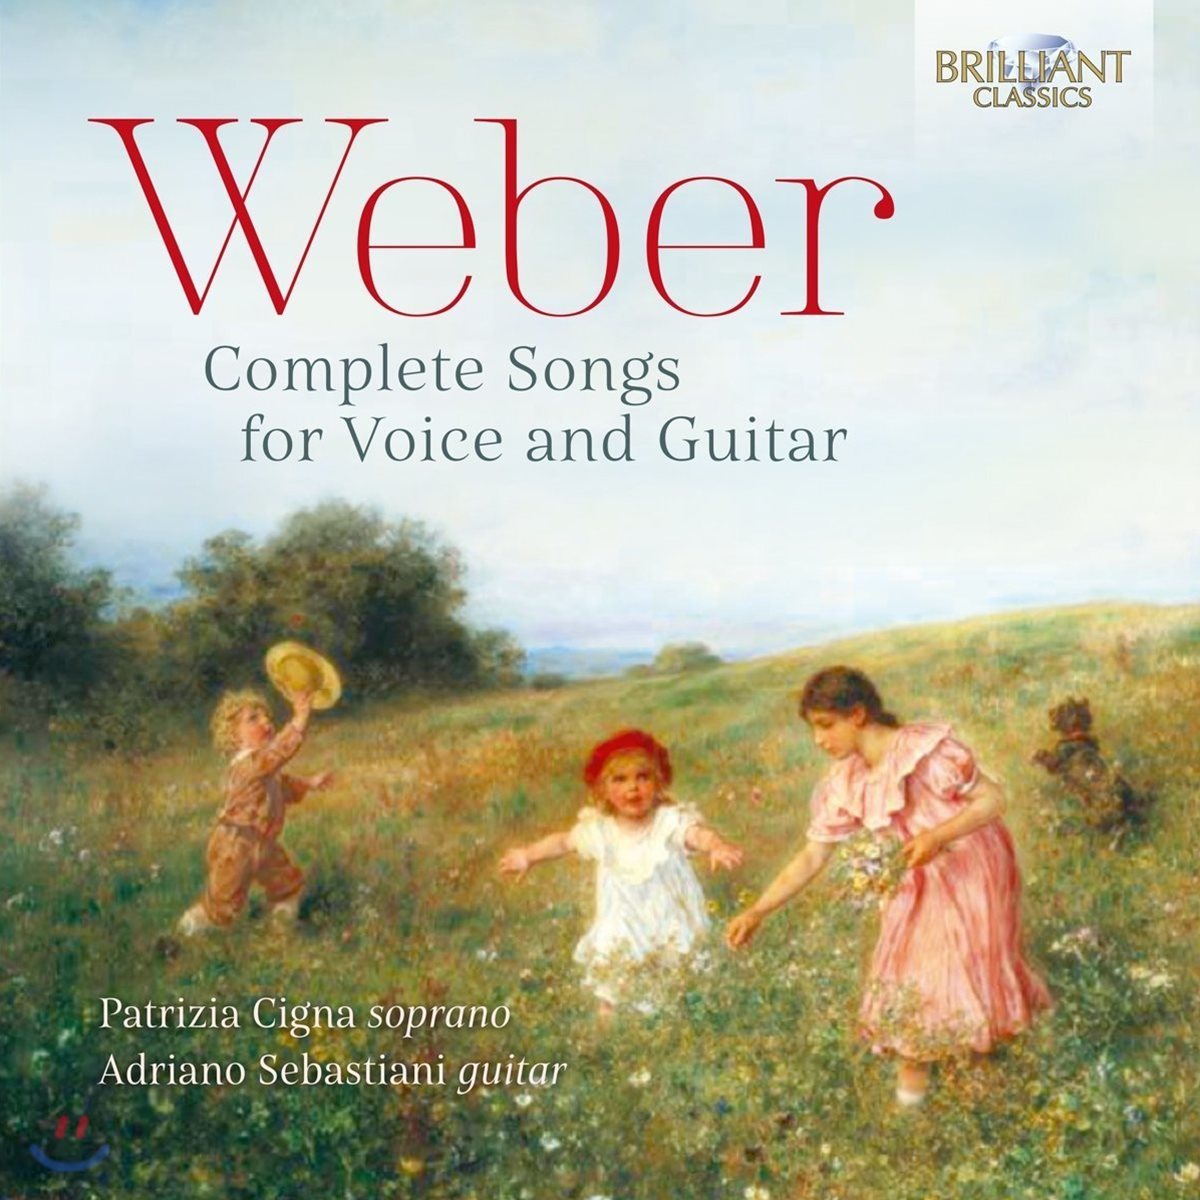 Patrizia Cigna 베버: 성악과 기타를 위한 작품 전곡집 (Carl Maria von Weber: Complete Songs for Voice and Guitar)